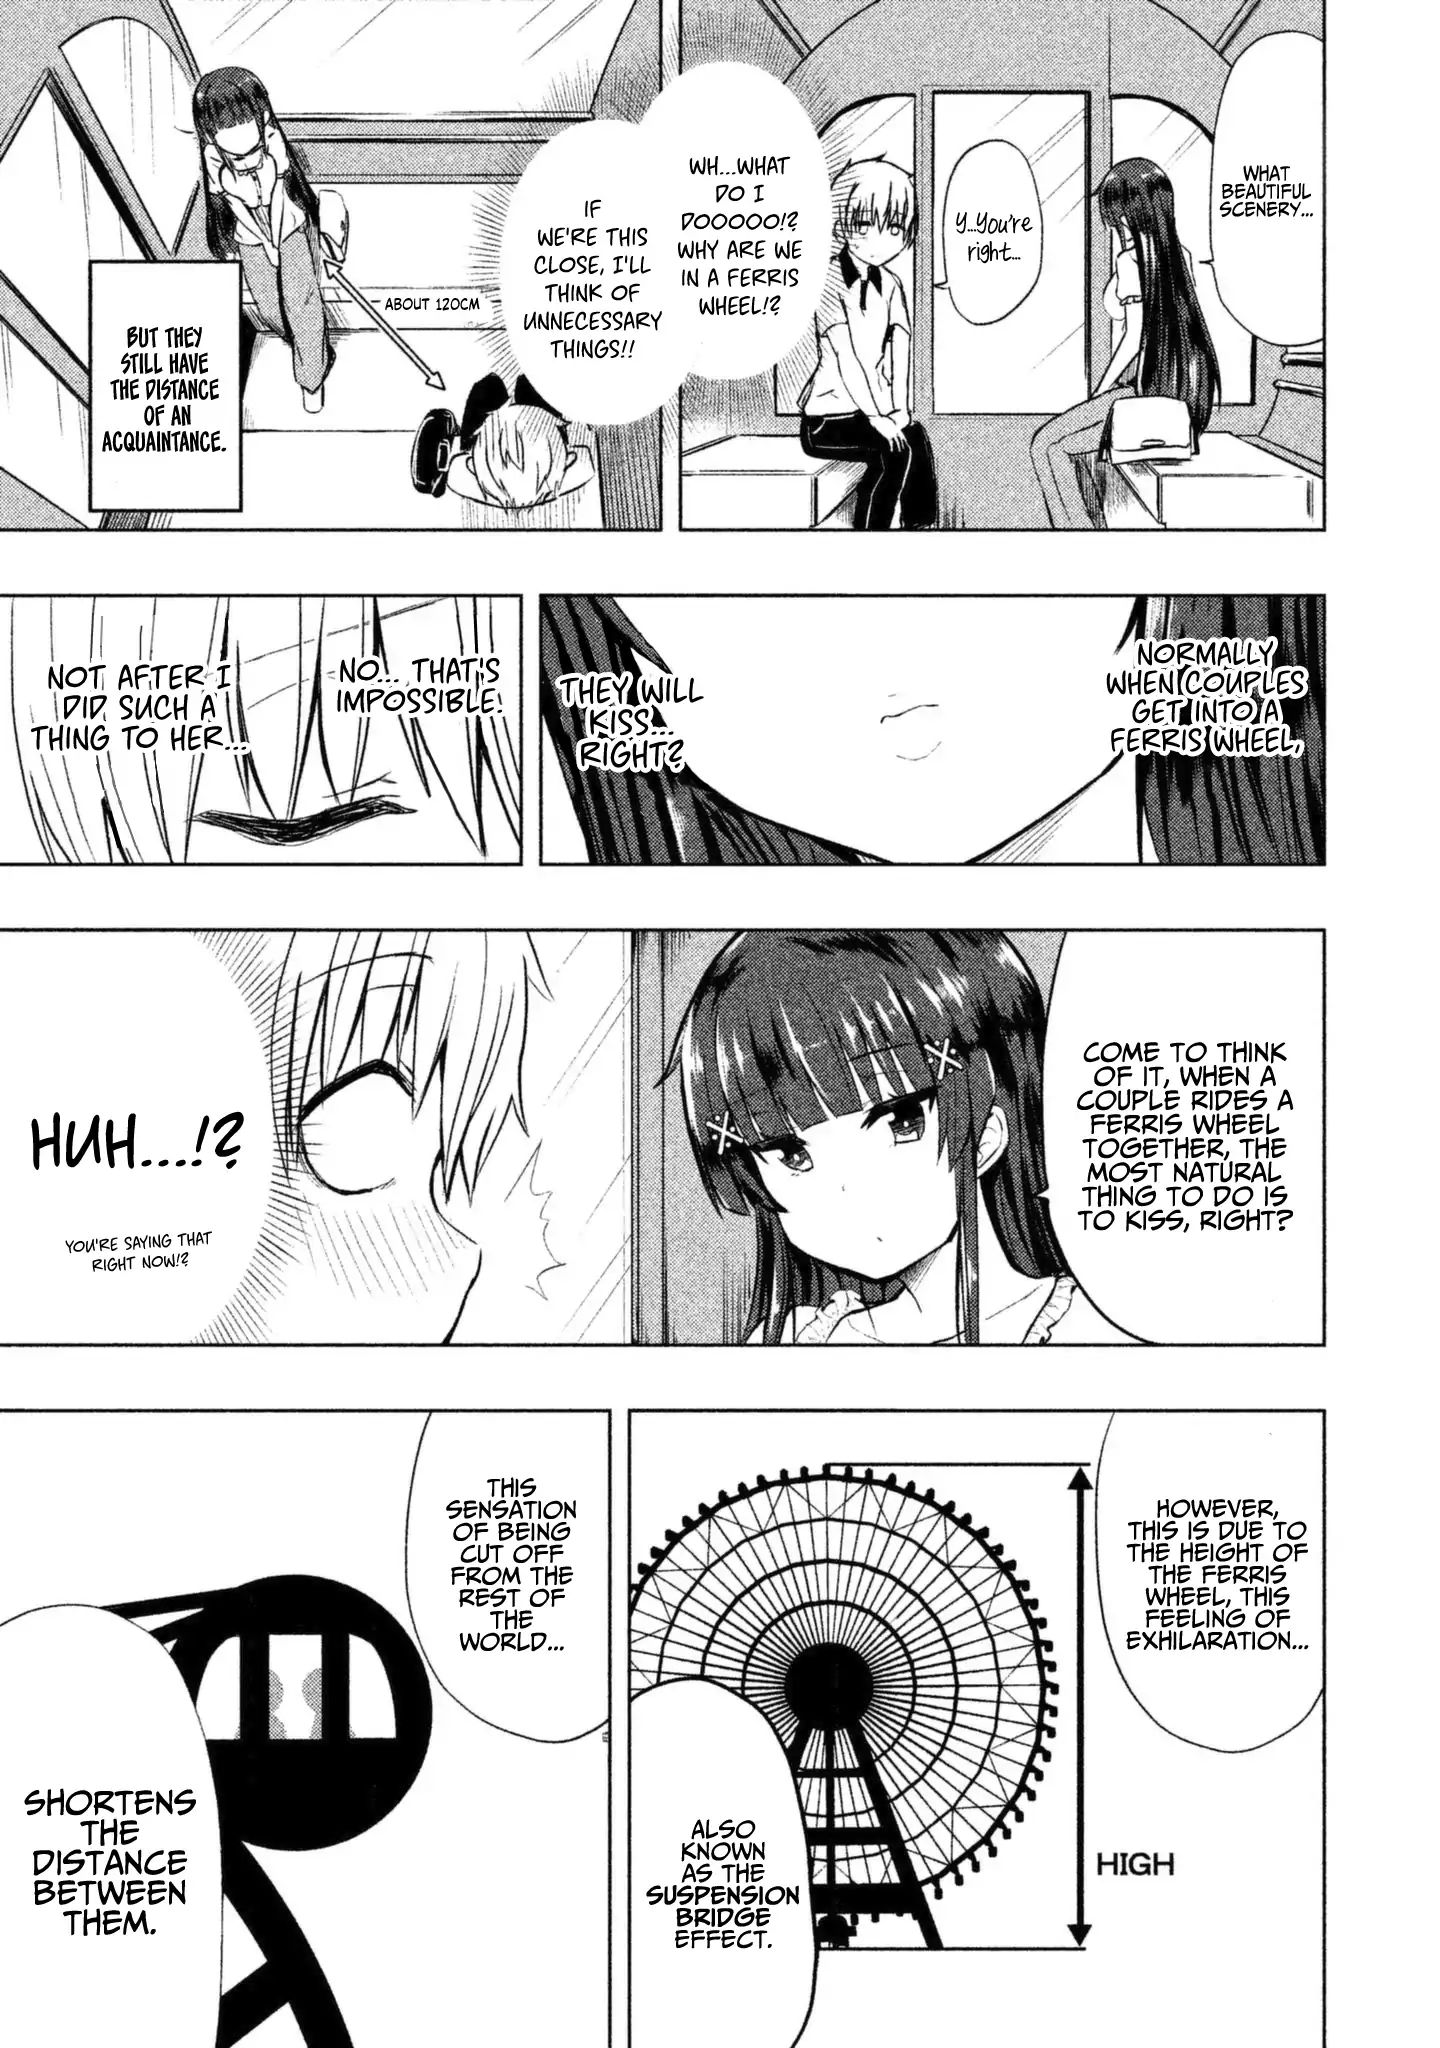 A Girl Who Is Very Well-Informed About Weird Knowledge, Takayukashiki Souko-san - chapter 8 - #4